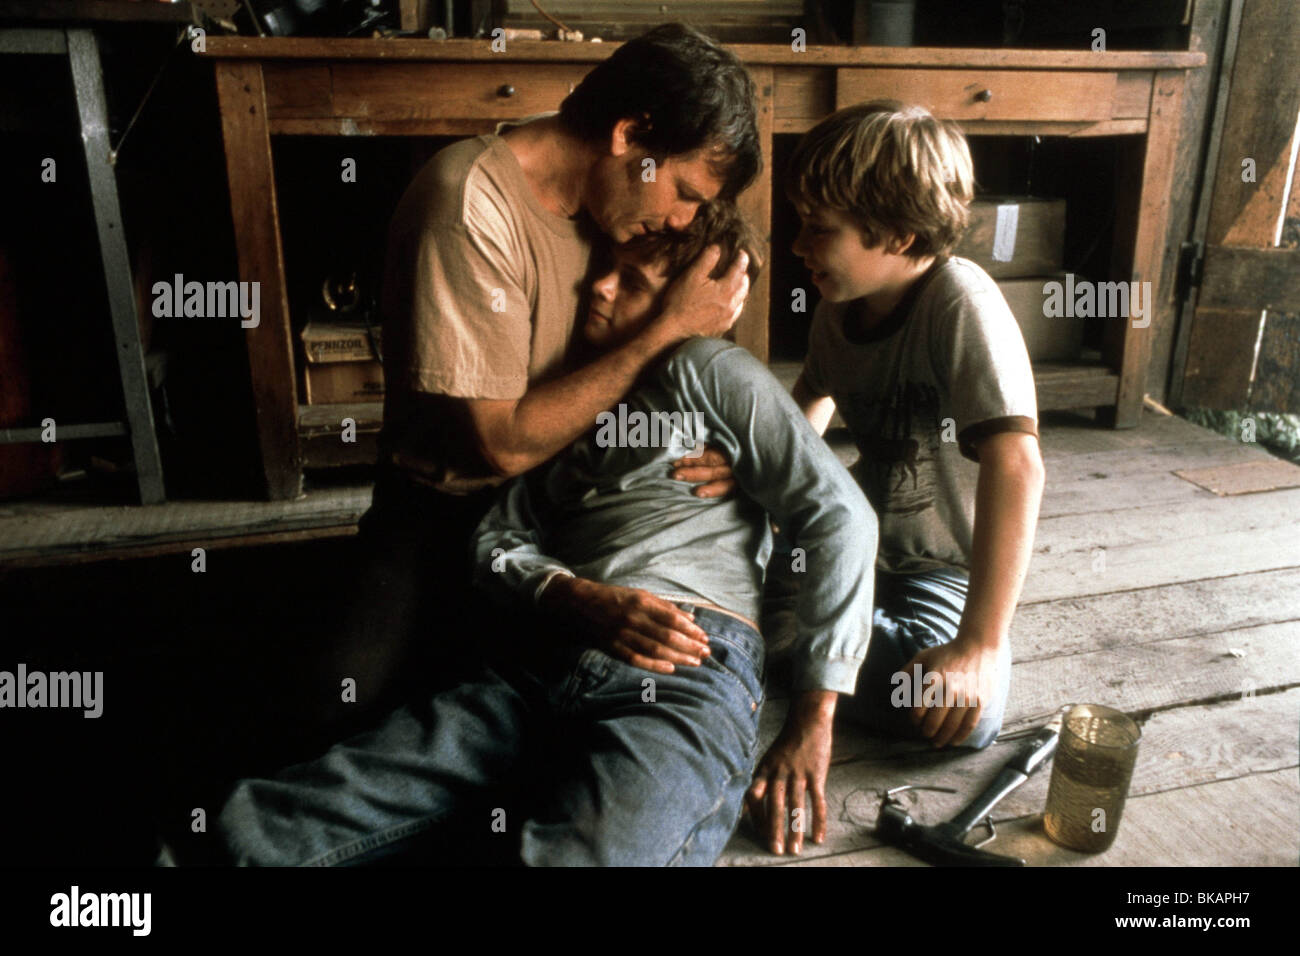 FRAILTY (2001) BILL PAXTON, MATTHEW O'LEARY, JEREMY SUMPTER FRLT 001 10 ...